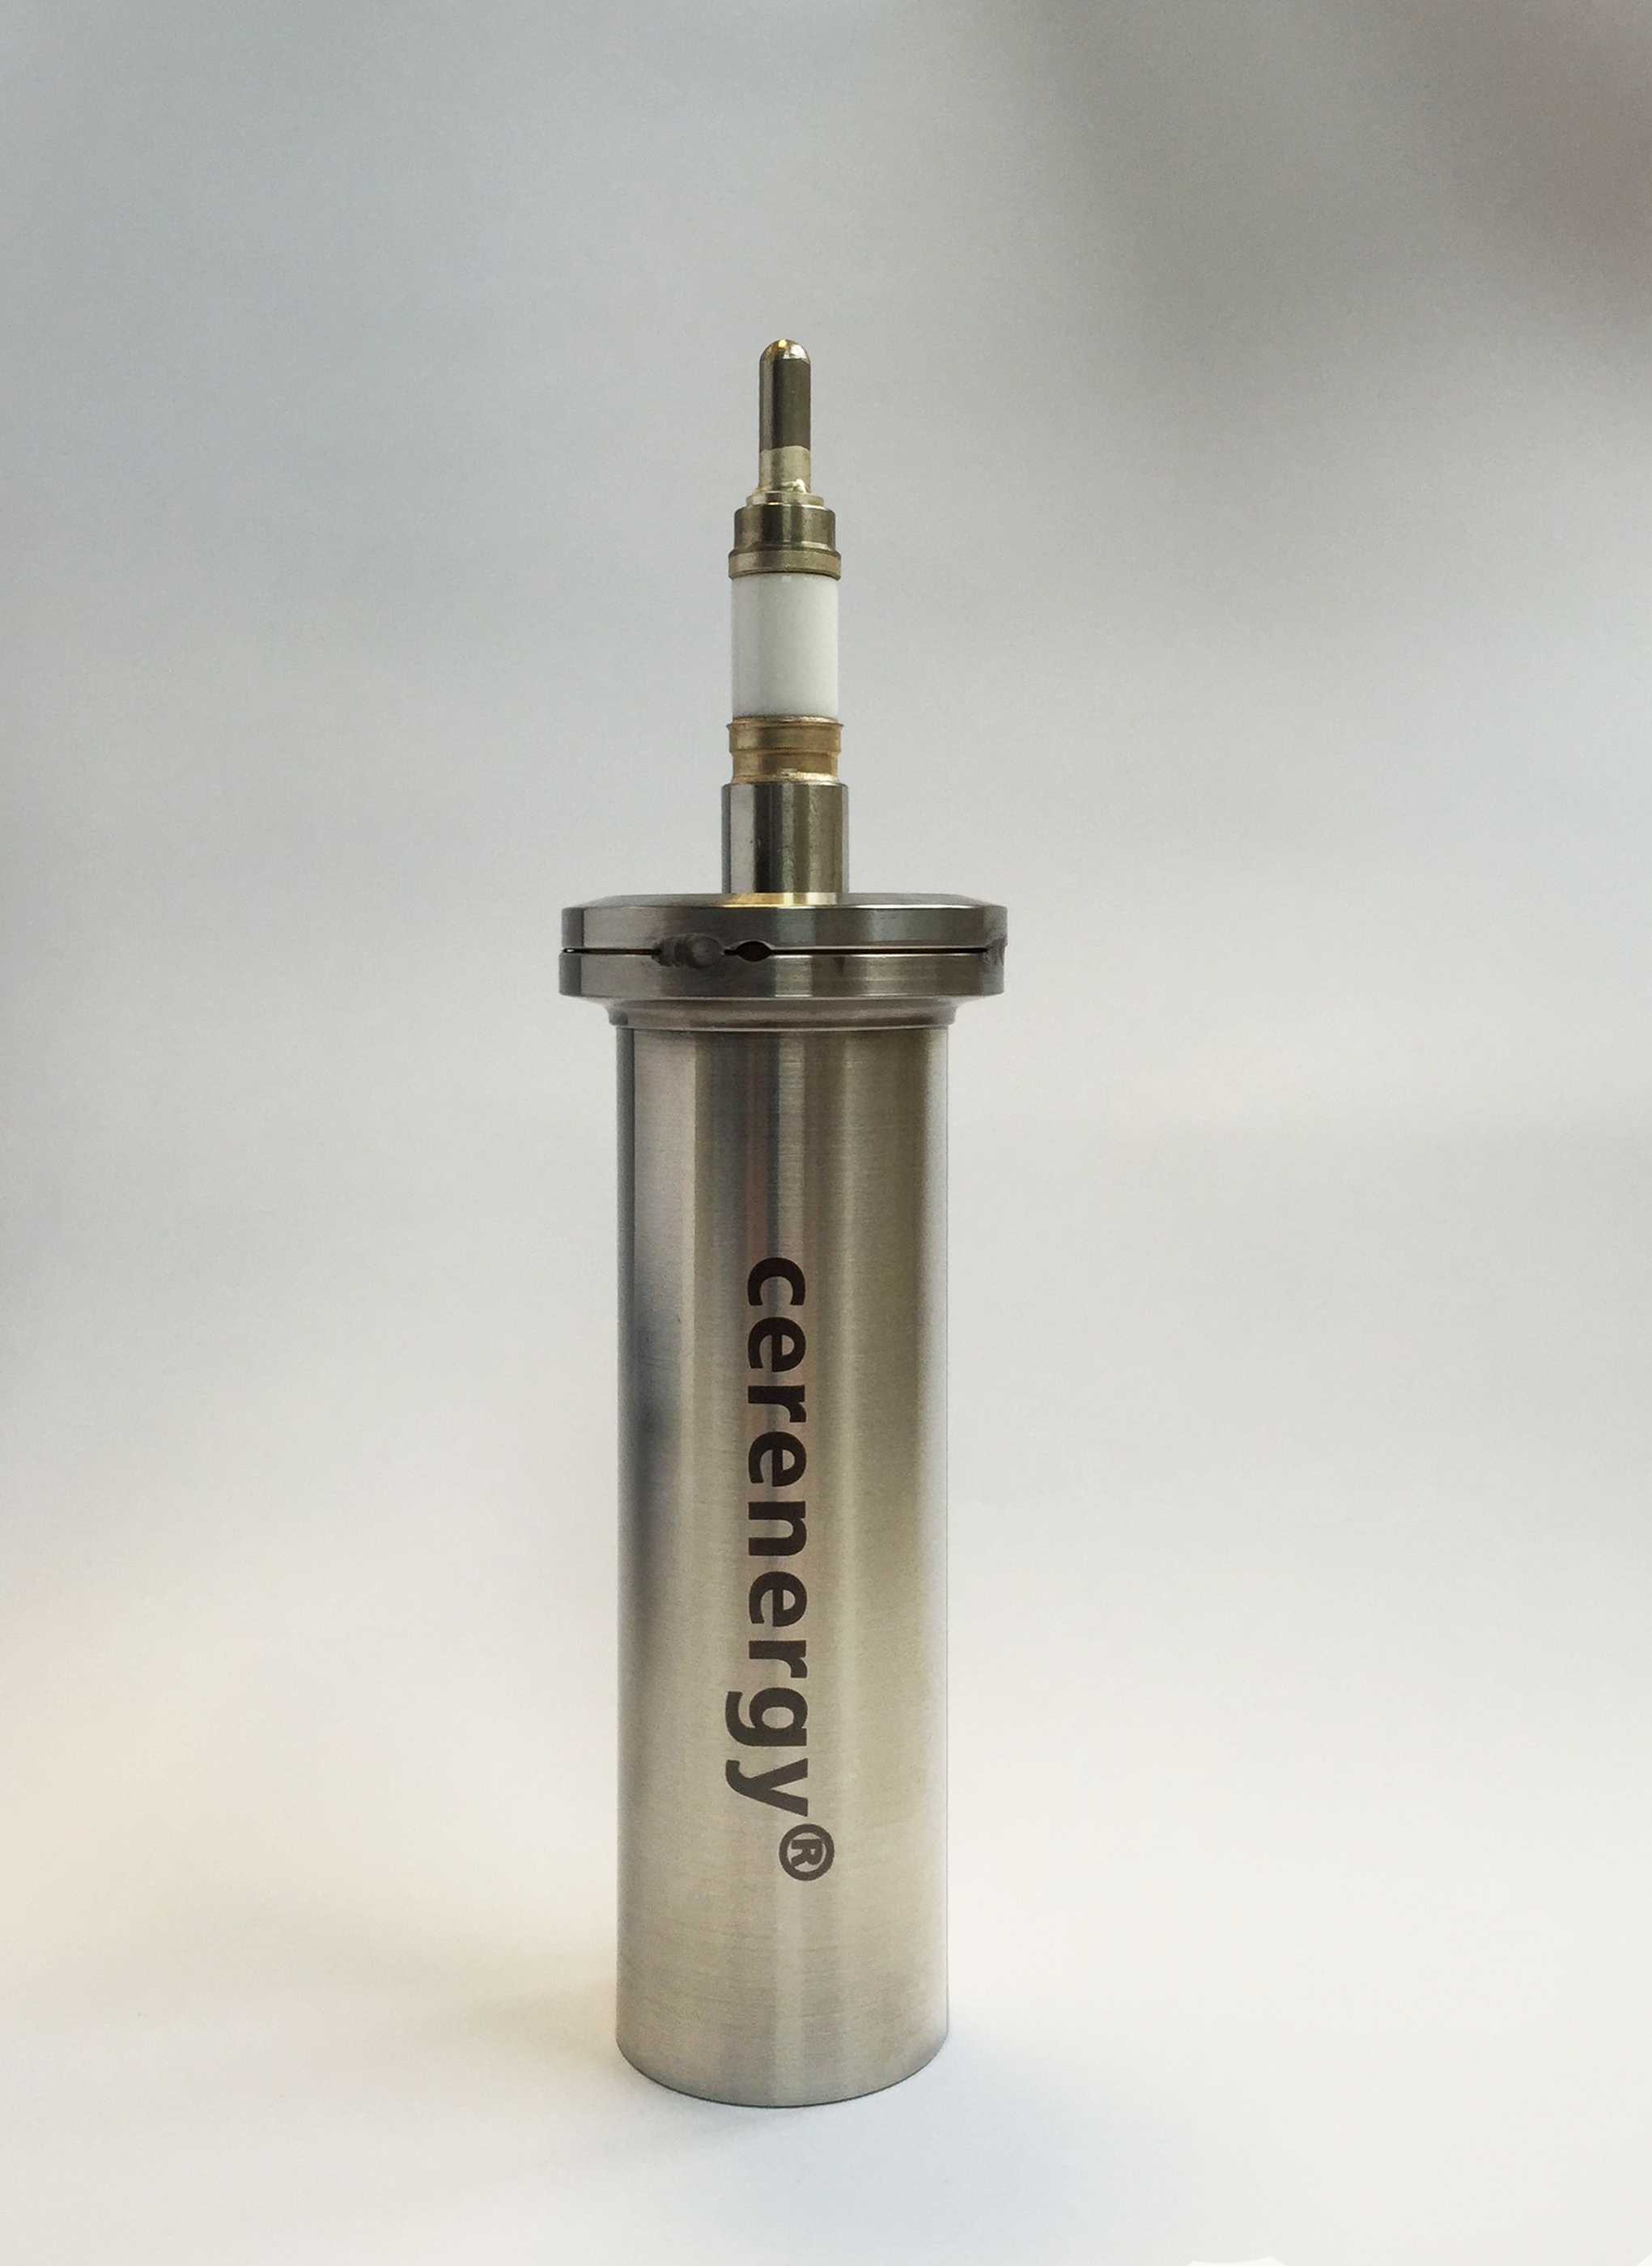 The picture shows the ceramic-based high-temperature battery made of sodium nickel chloride developed at Fraunhofer IKTS. This sodium nickel chloride battery, with the brand name cerenergy, can store energy generated from renewable energy sources and make it available when needed. Cerenergy, popularly known as a zebra battery, thus serves as a stationary energy storage for renewable energy sources.  Translated with www.DeepL.com/Translator (free version)